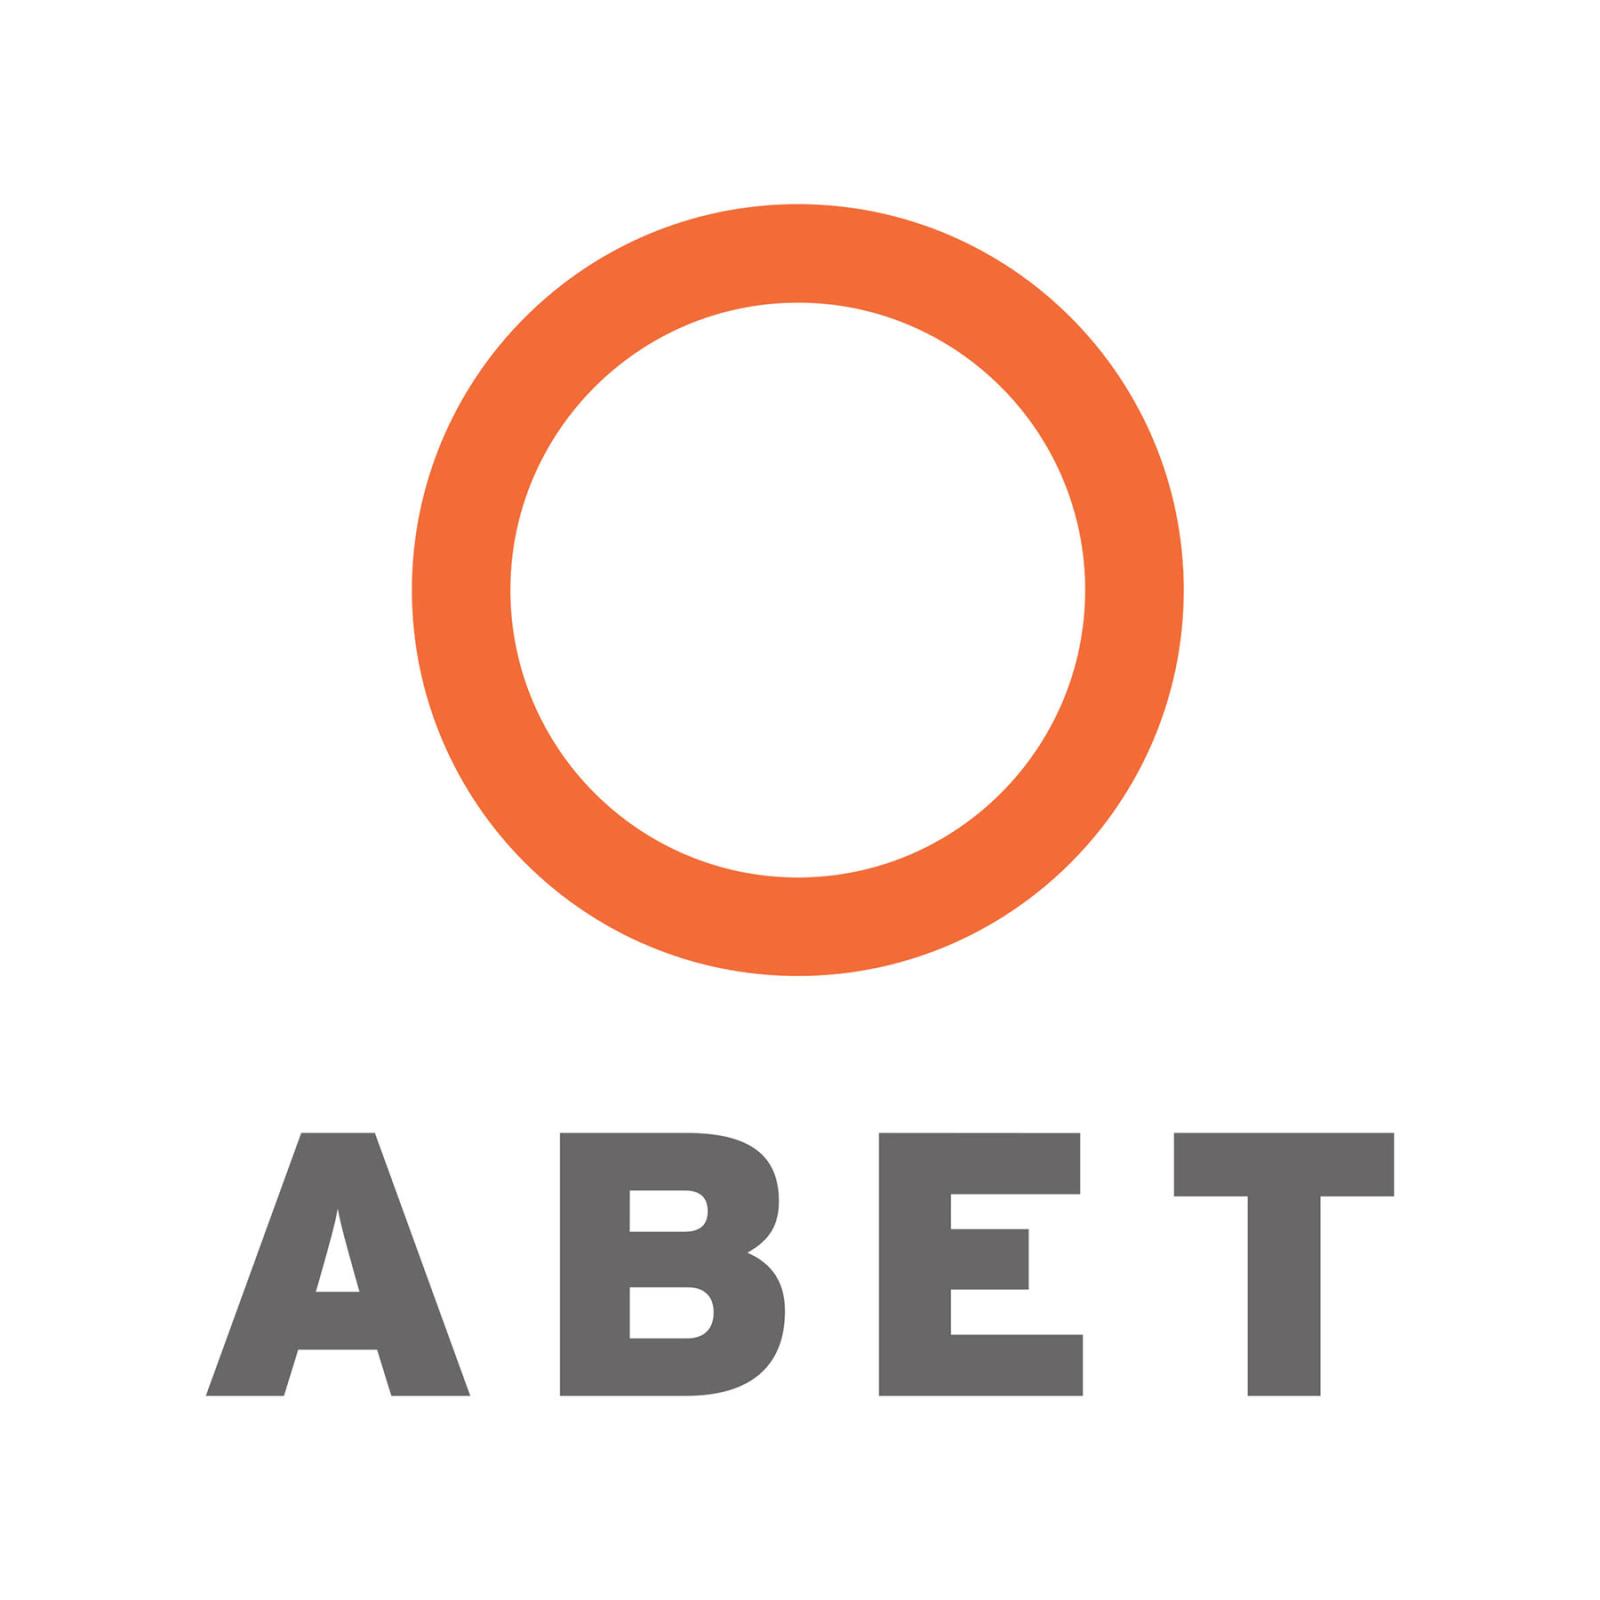 Logo of the Computing Accreditation Commission of ABET